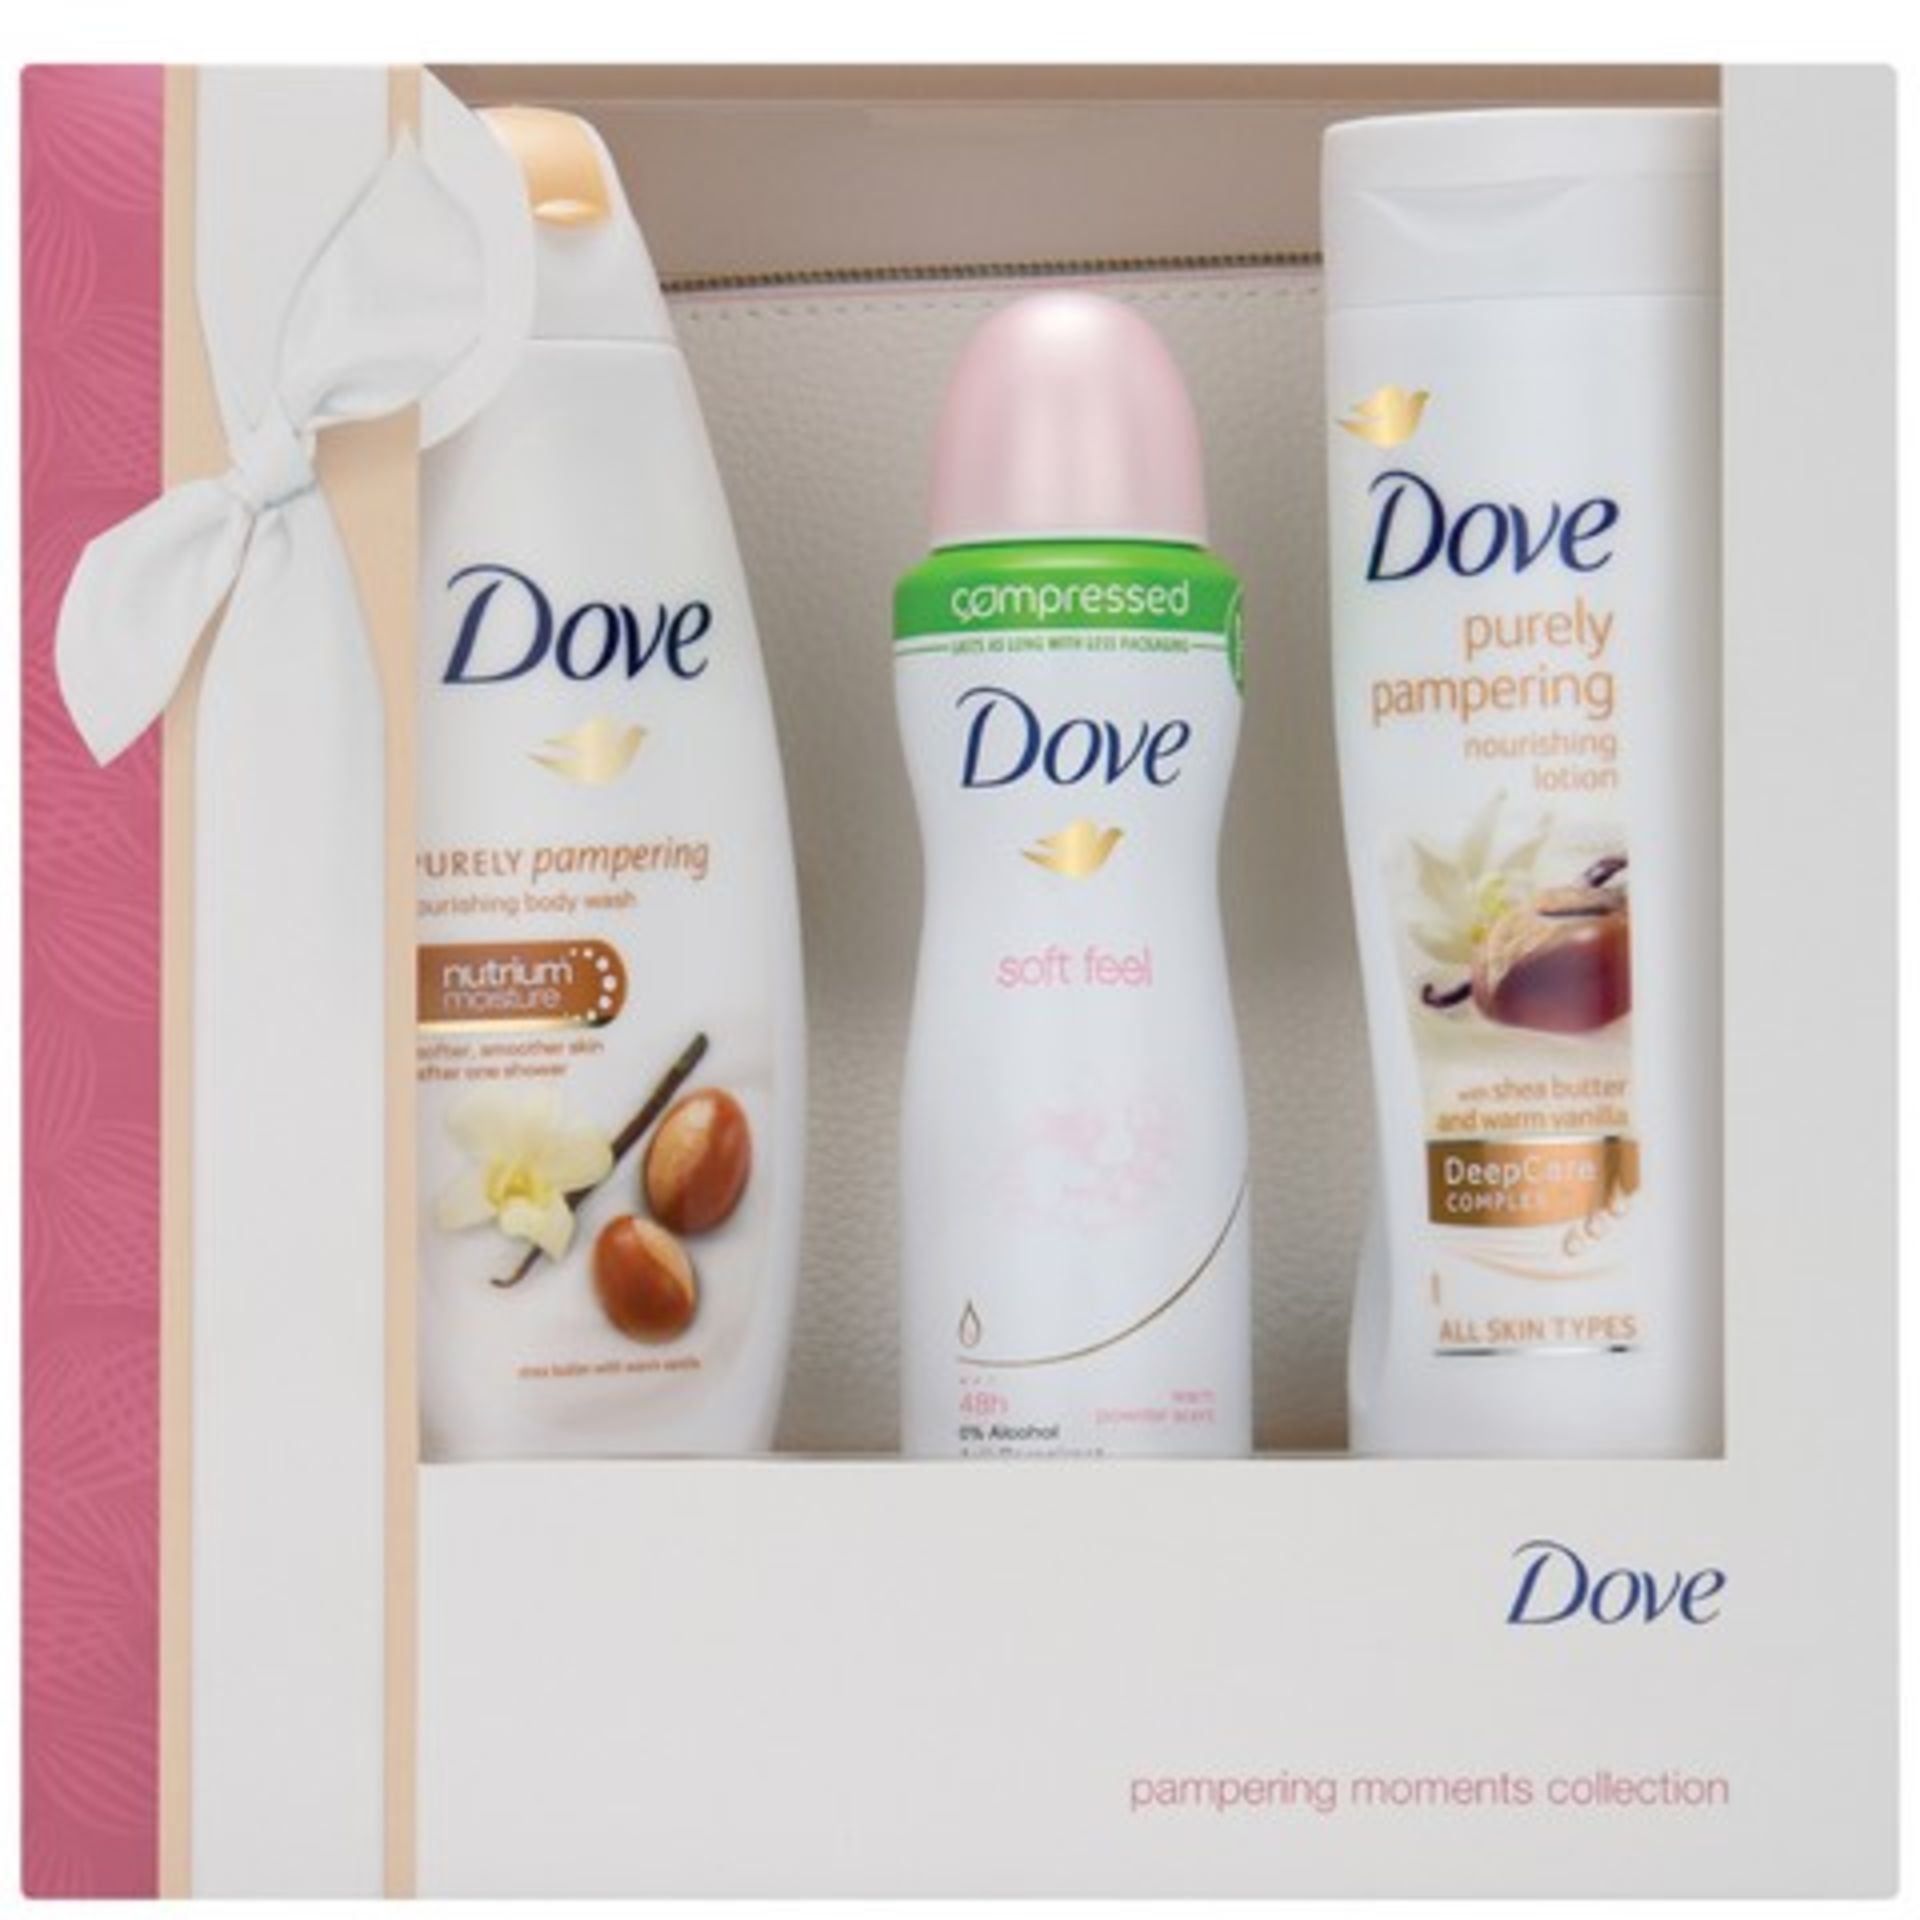 V Brand New Dove Pampering Moments Trio & Washbag Set Includes 3 Full-Size Dove Products - Image 2 of 2